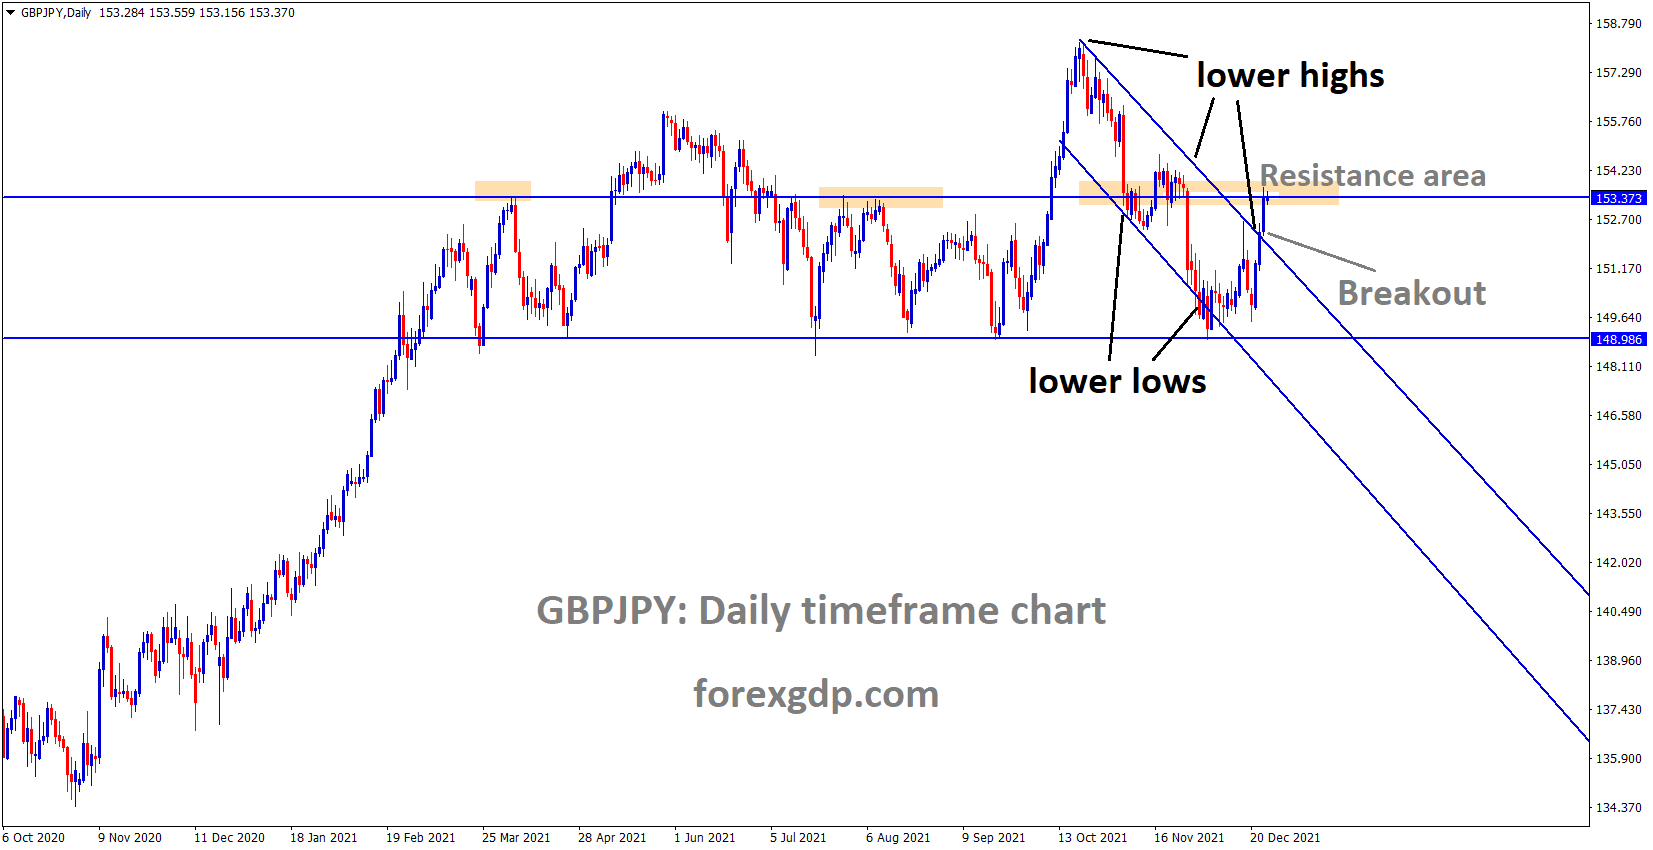 GBPJPY has broken the Descending channel and the market has reached the horizontal resistance area of the channel.